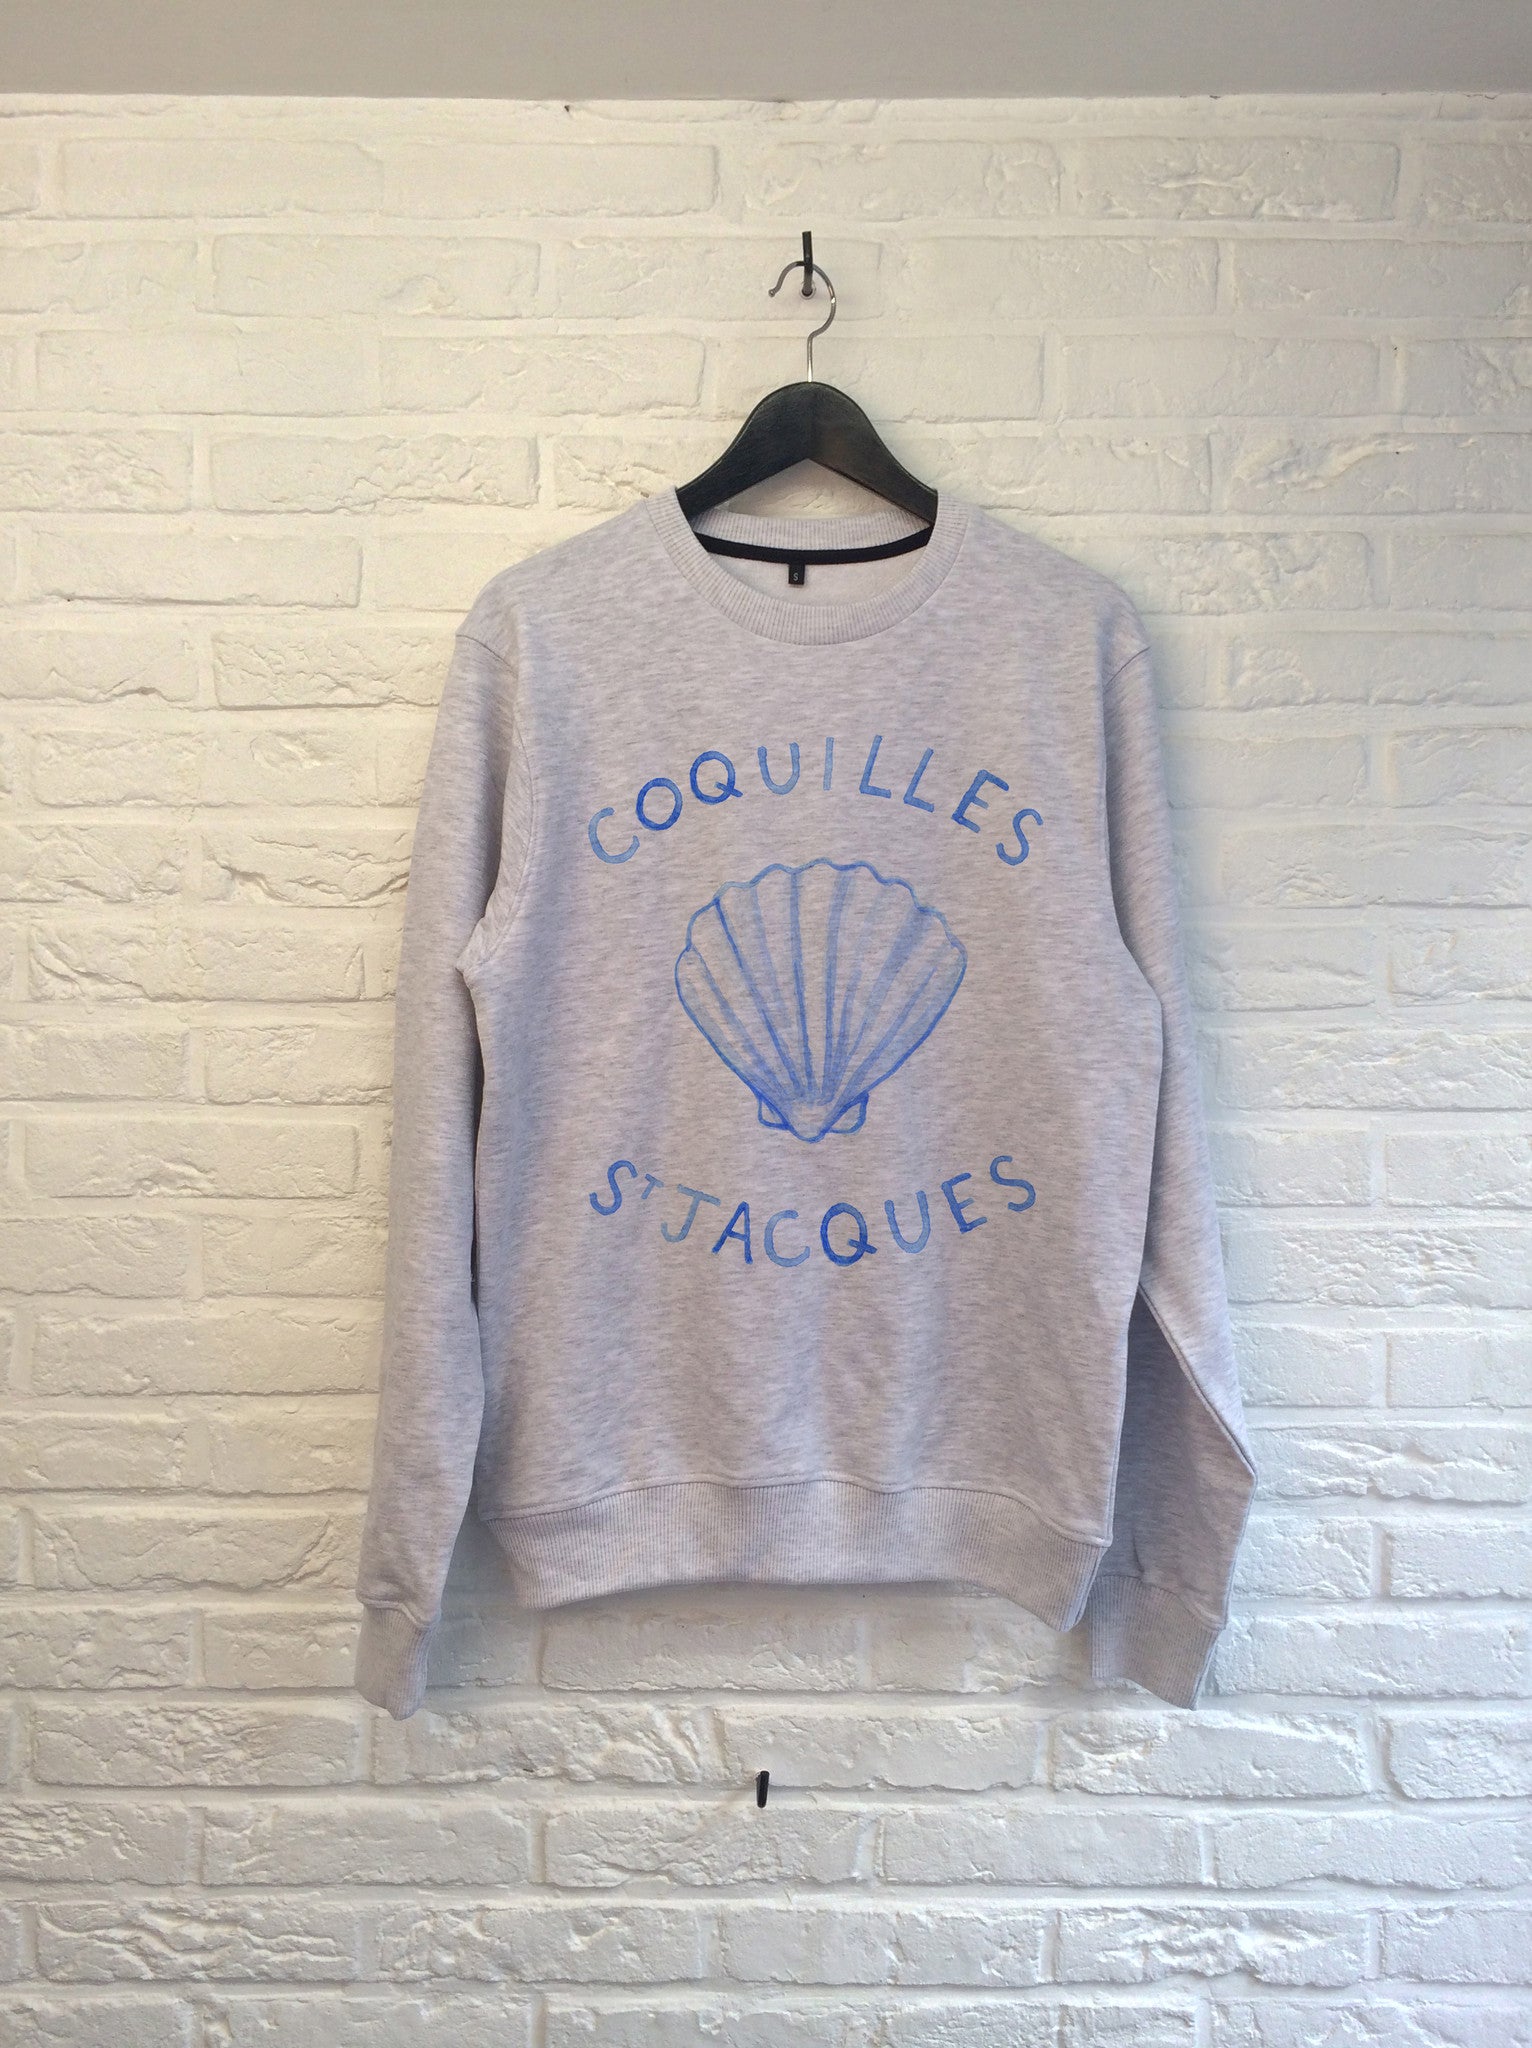 TH Gallery - Coquilles St Jacques - Sweat-Sweat shirts-Atelier Amelot